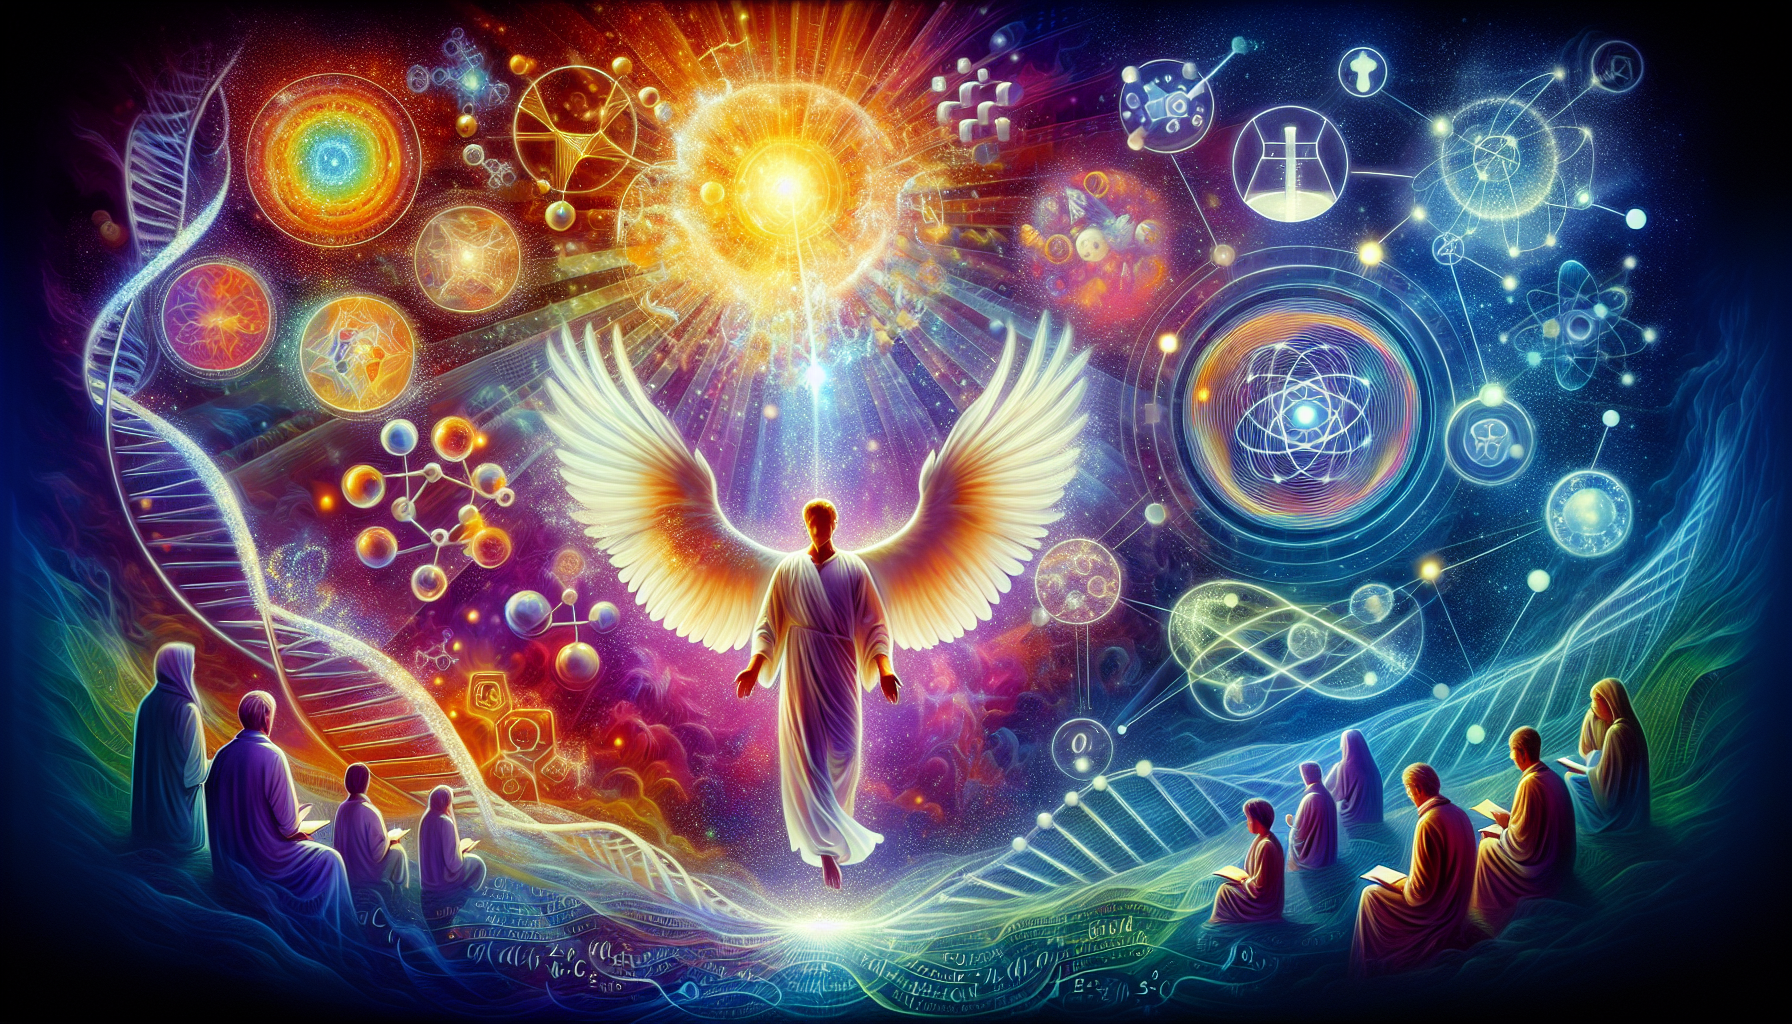 Create an ethereal and luminous image showcasing the Holy Spirit bestowing the gift of science upon a human. The scene should be filled with divine light, and the person receiving the gift should be d